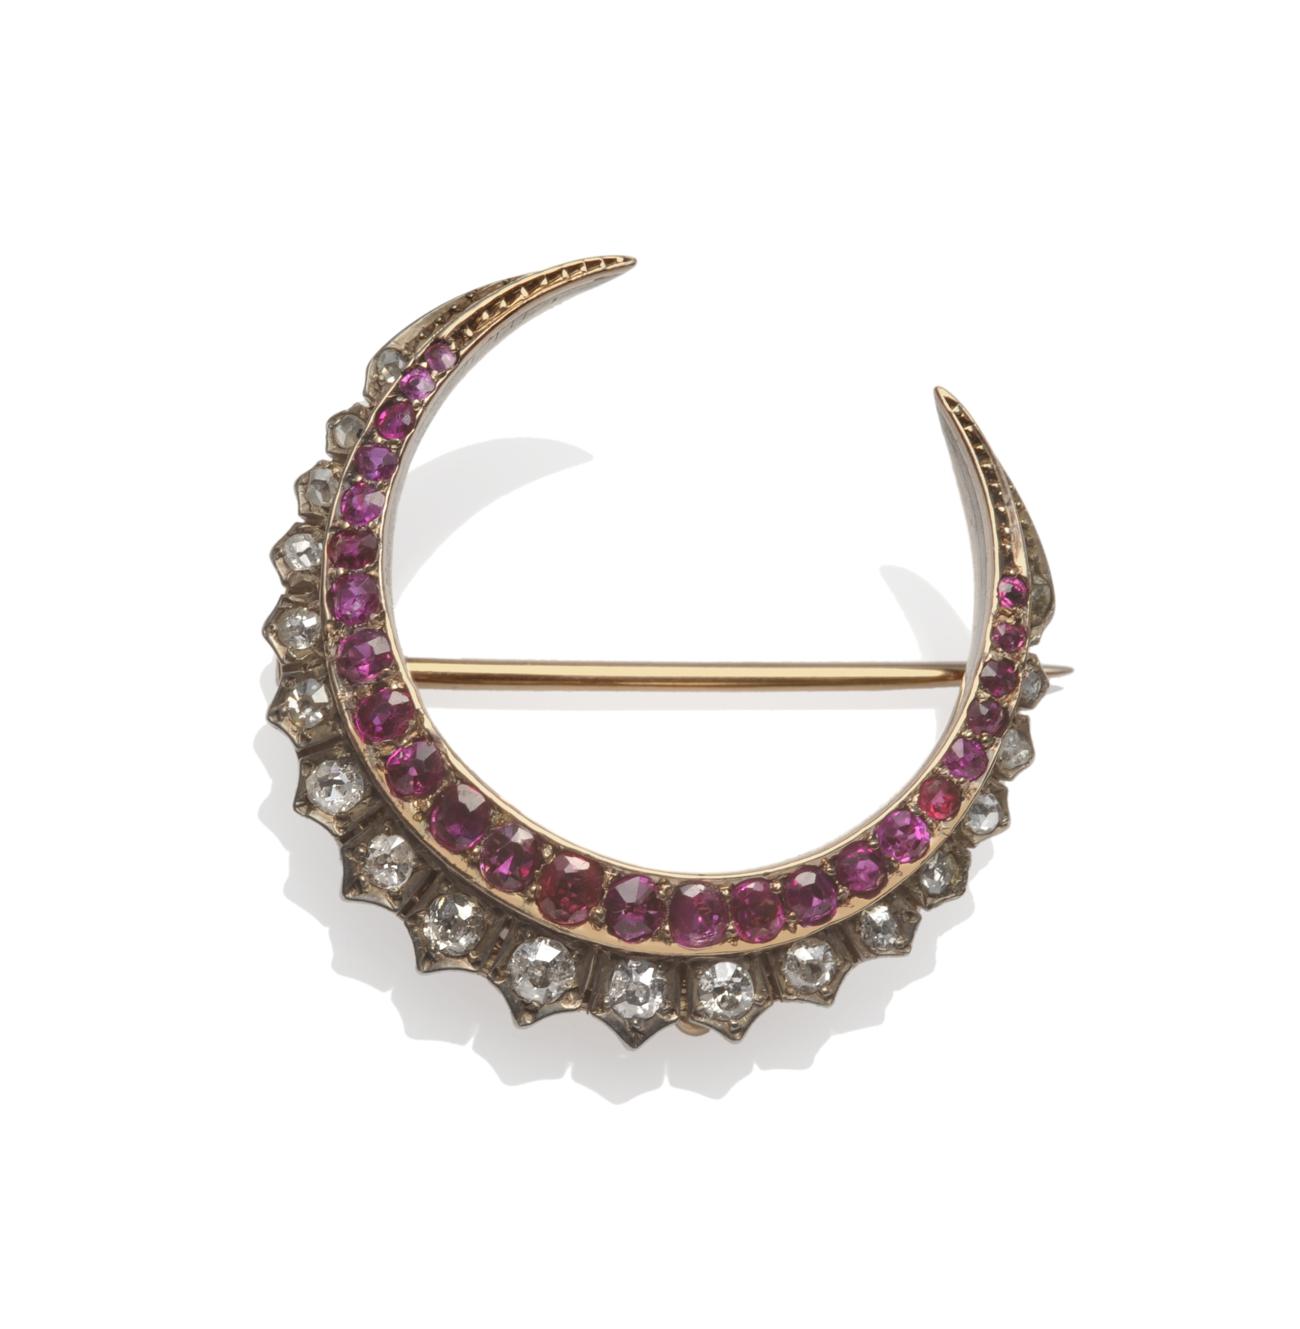 A Ruby and Diamond Crescent Brooch, circa 1880, the inner curve set with graduated mixed cut